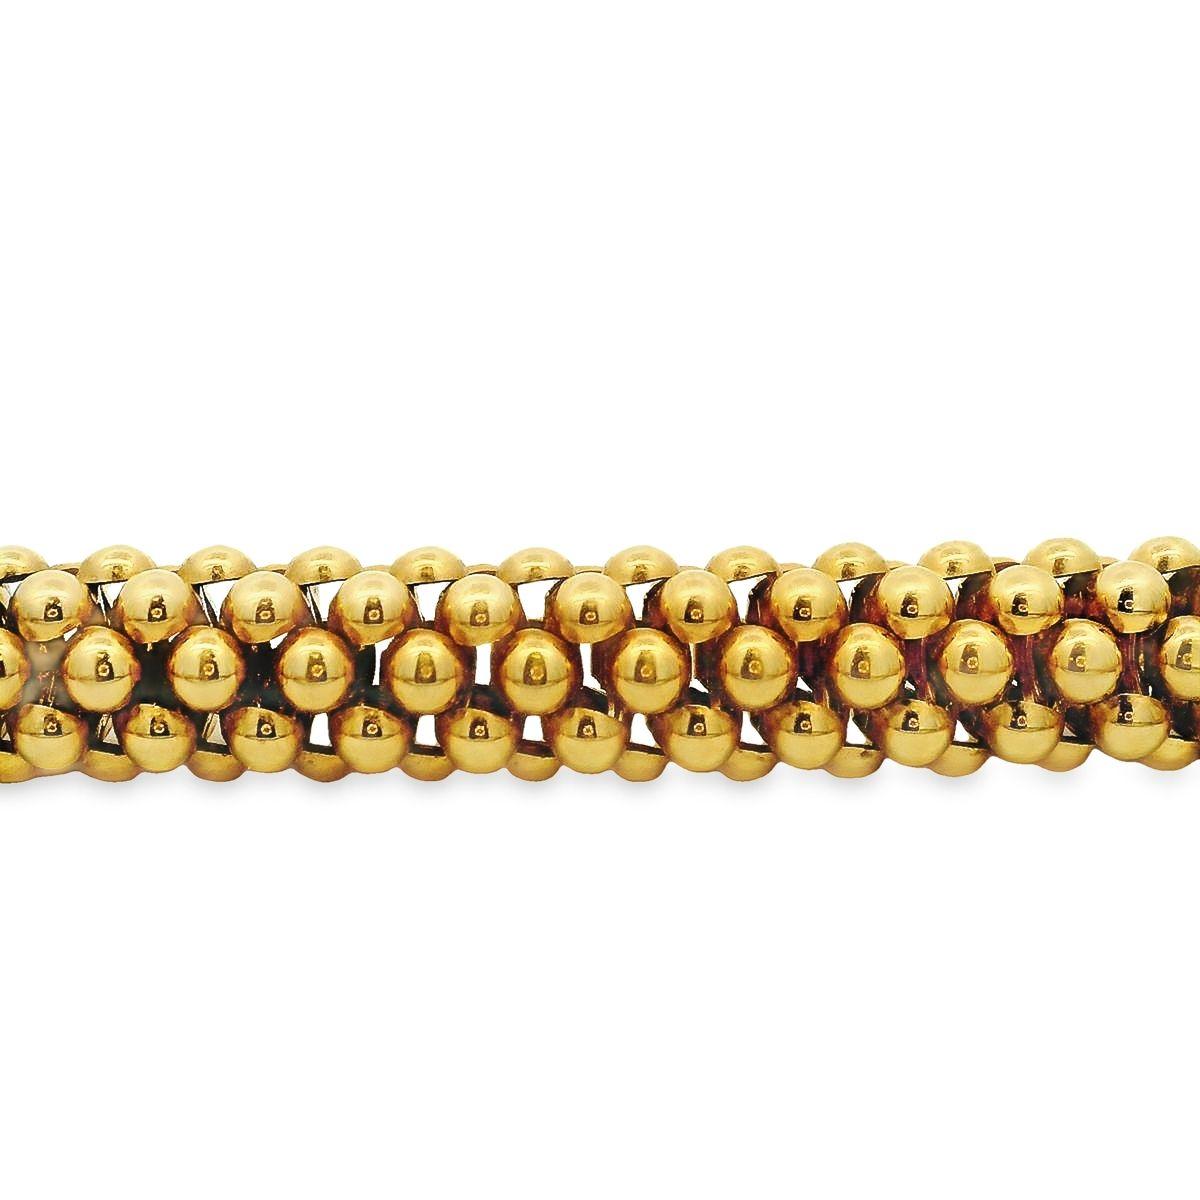 This Italian made necklace by Fope is offered by Alex & Co. The chunky bold statement 18K yellow gold necklace features flexible rows of interlocking beads with a rounded decorative twist plunger clasp. The necklace weighs 83.80 grams and measures